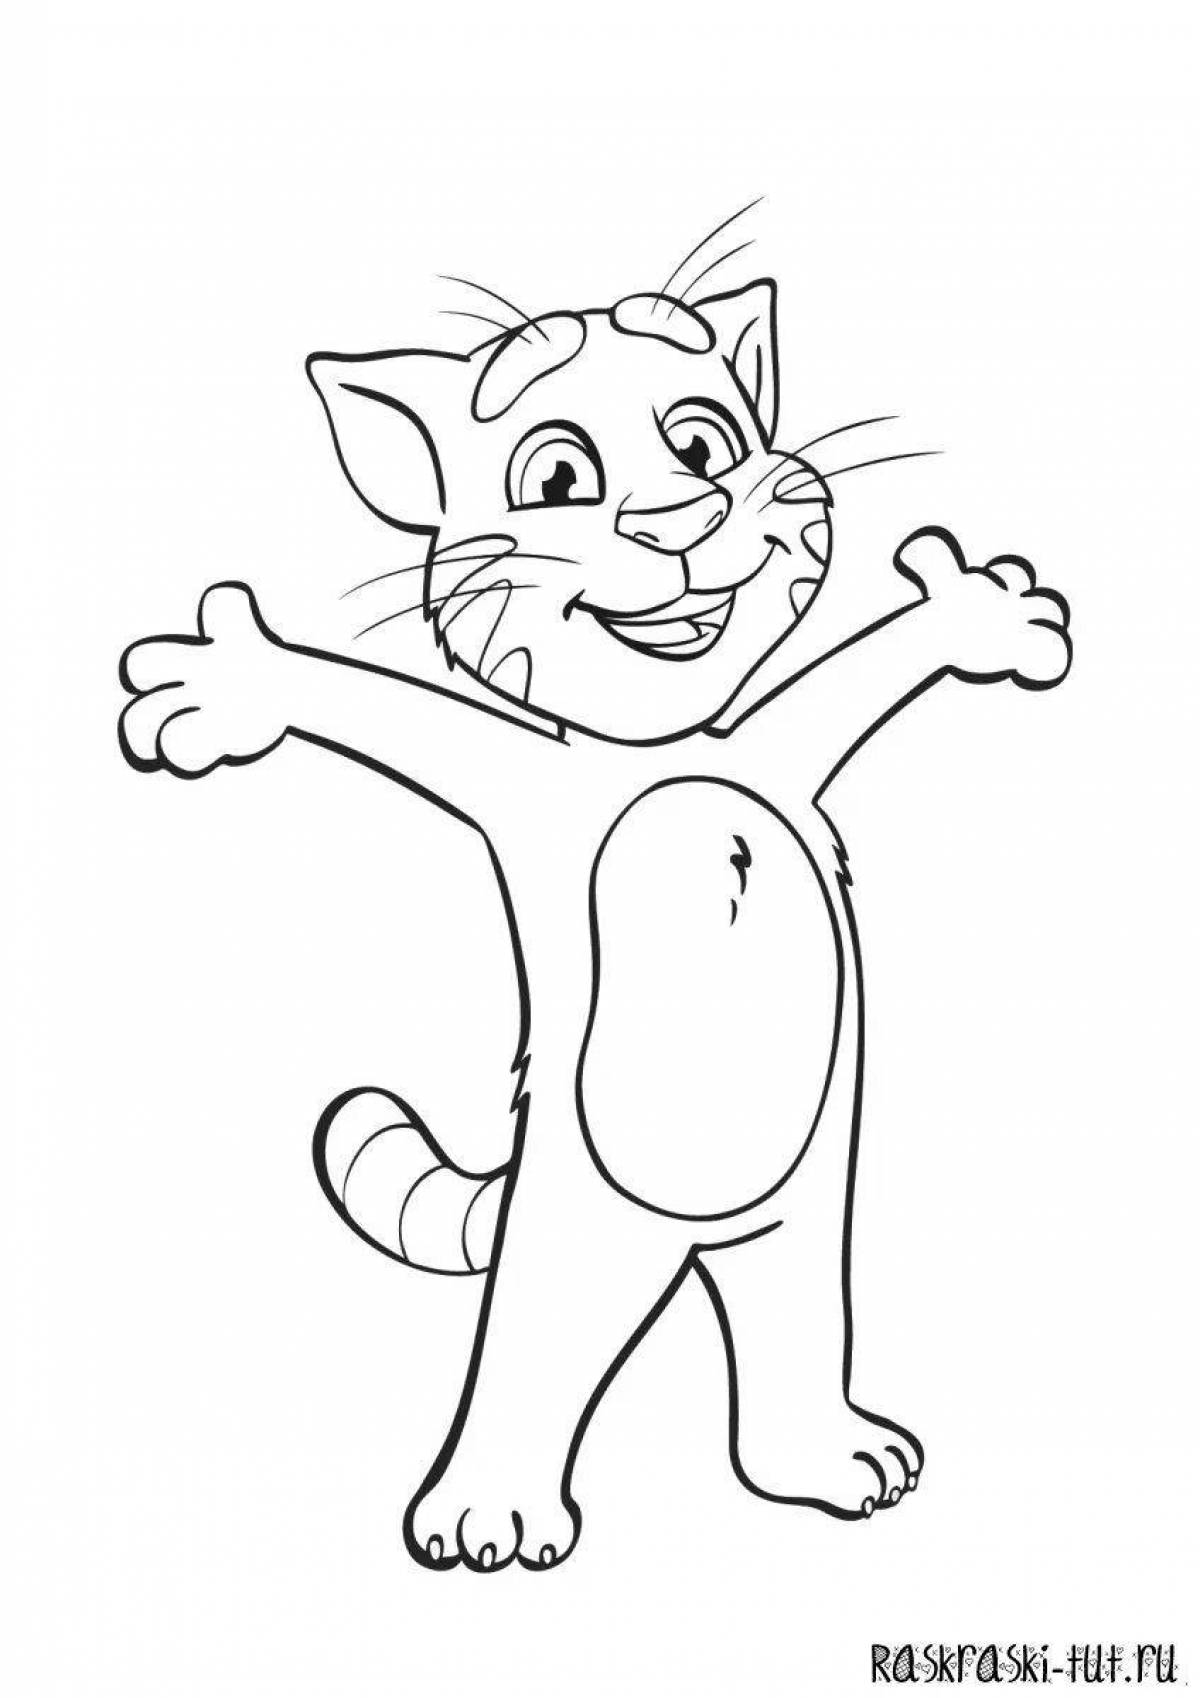 Bright tom and angela coloring pages for kids